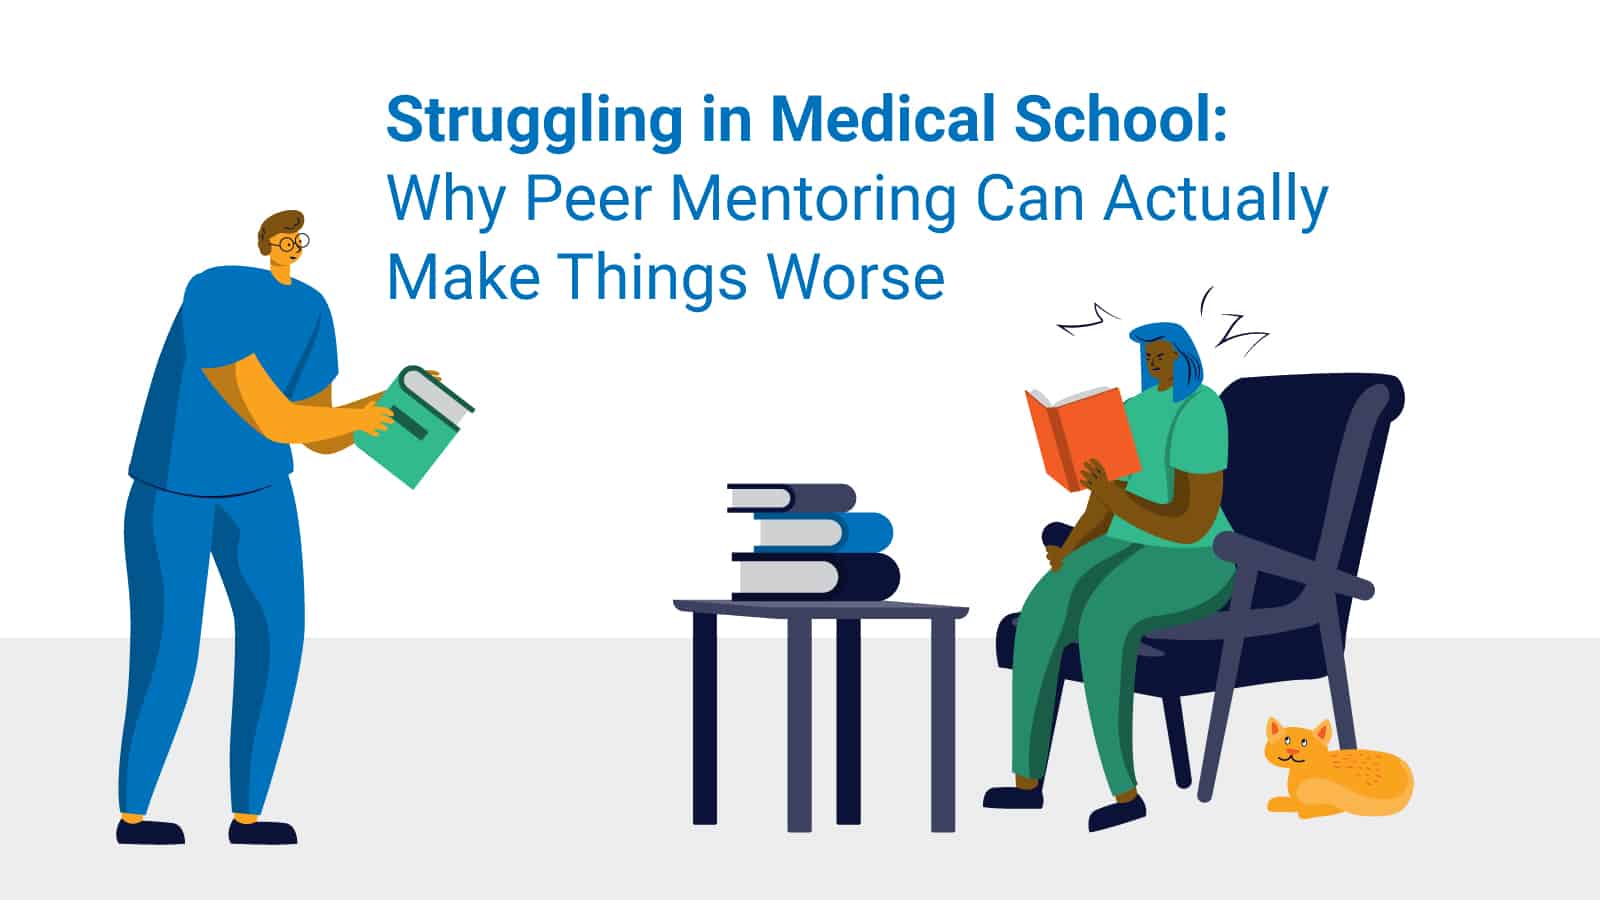 Featured image for “Struggling in Medical School: Why Peer Mentoring Can Actually Make Things Worse”